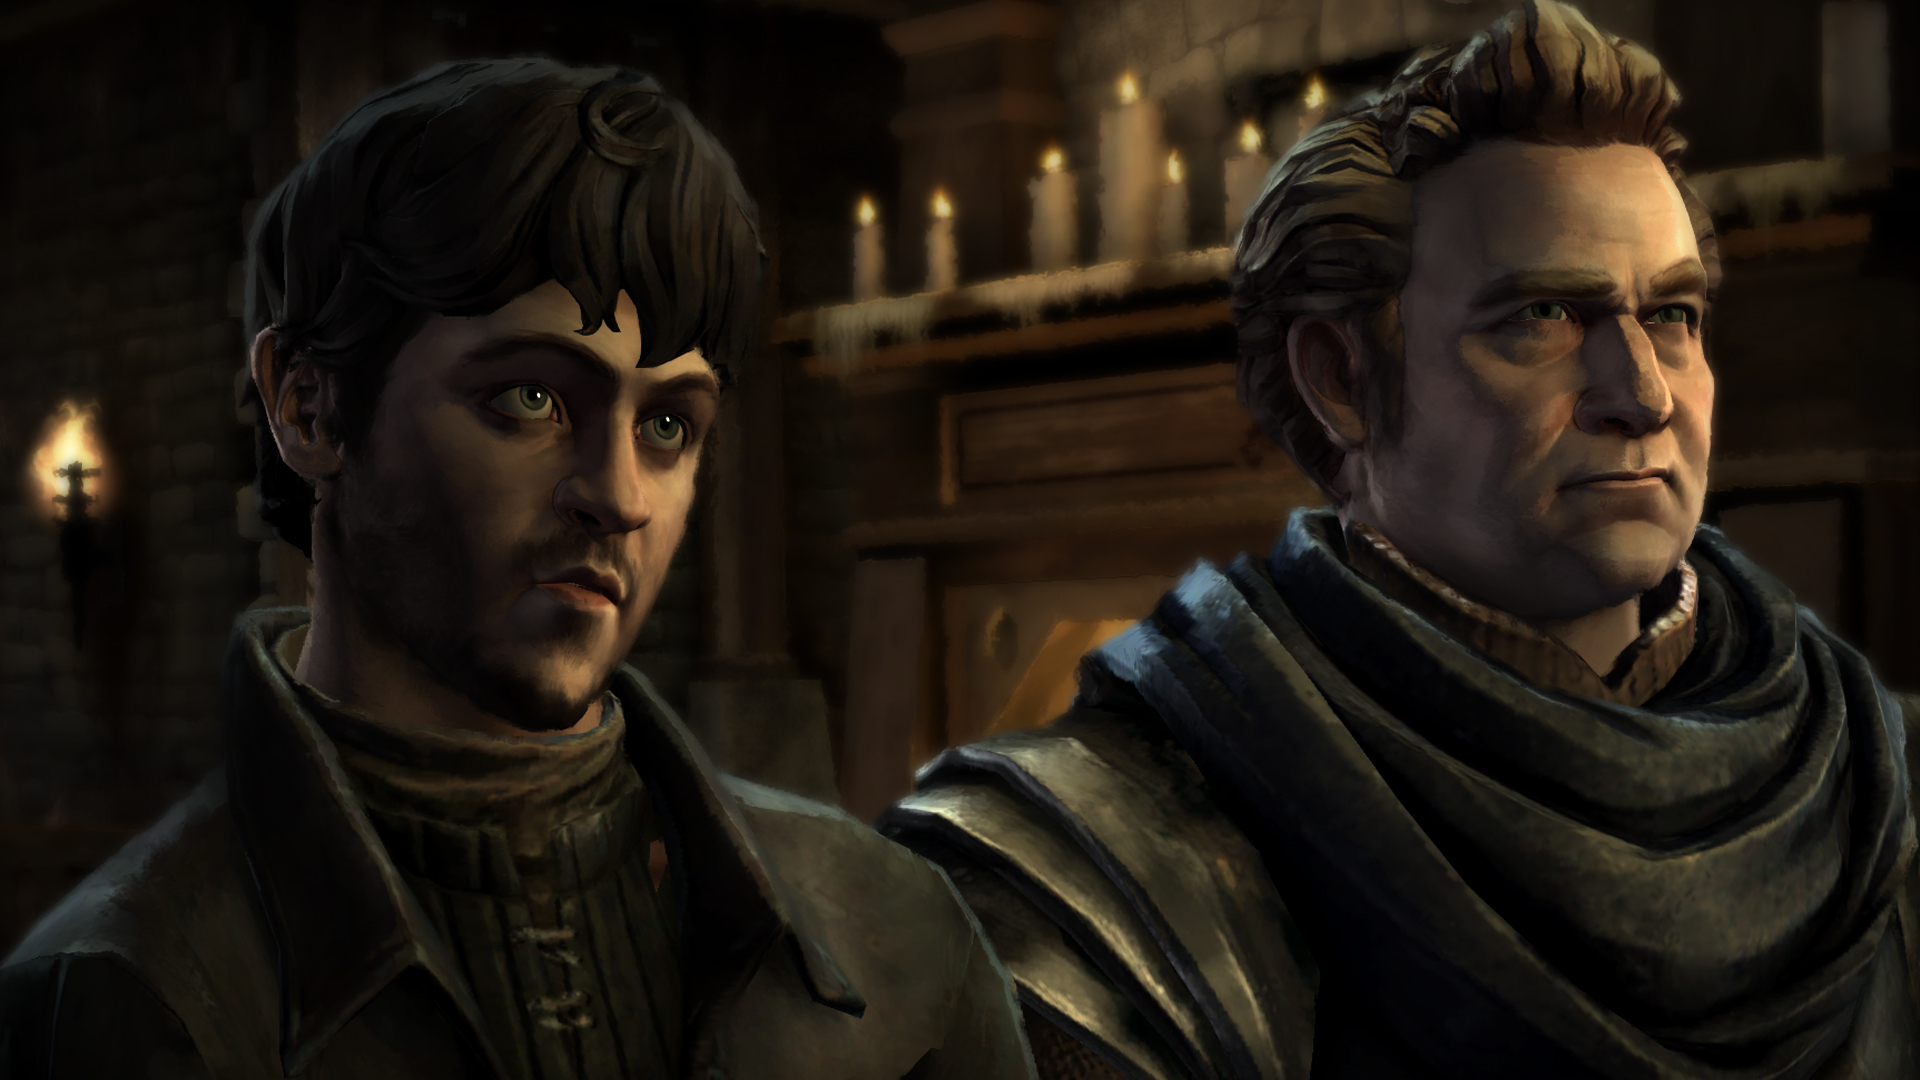 1920x1080 > Game Of Thrones - A Telltale Games Series Wallpapers